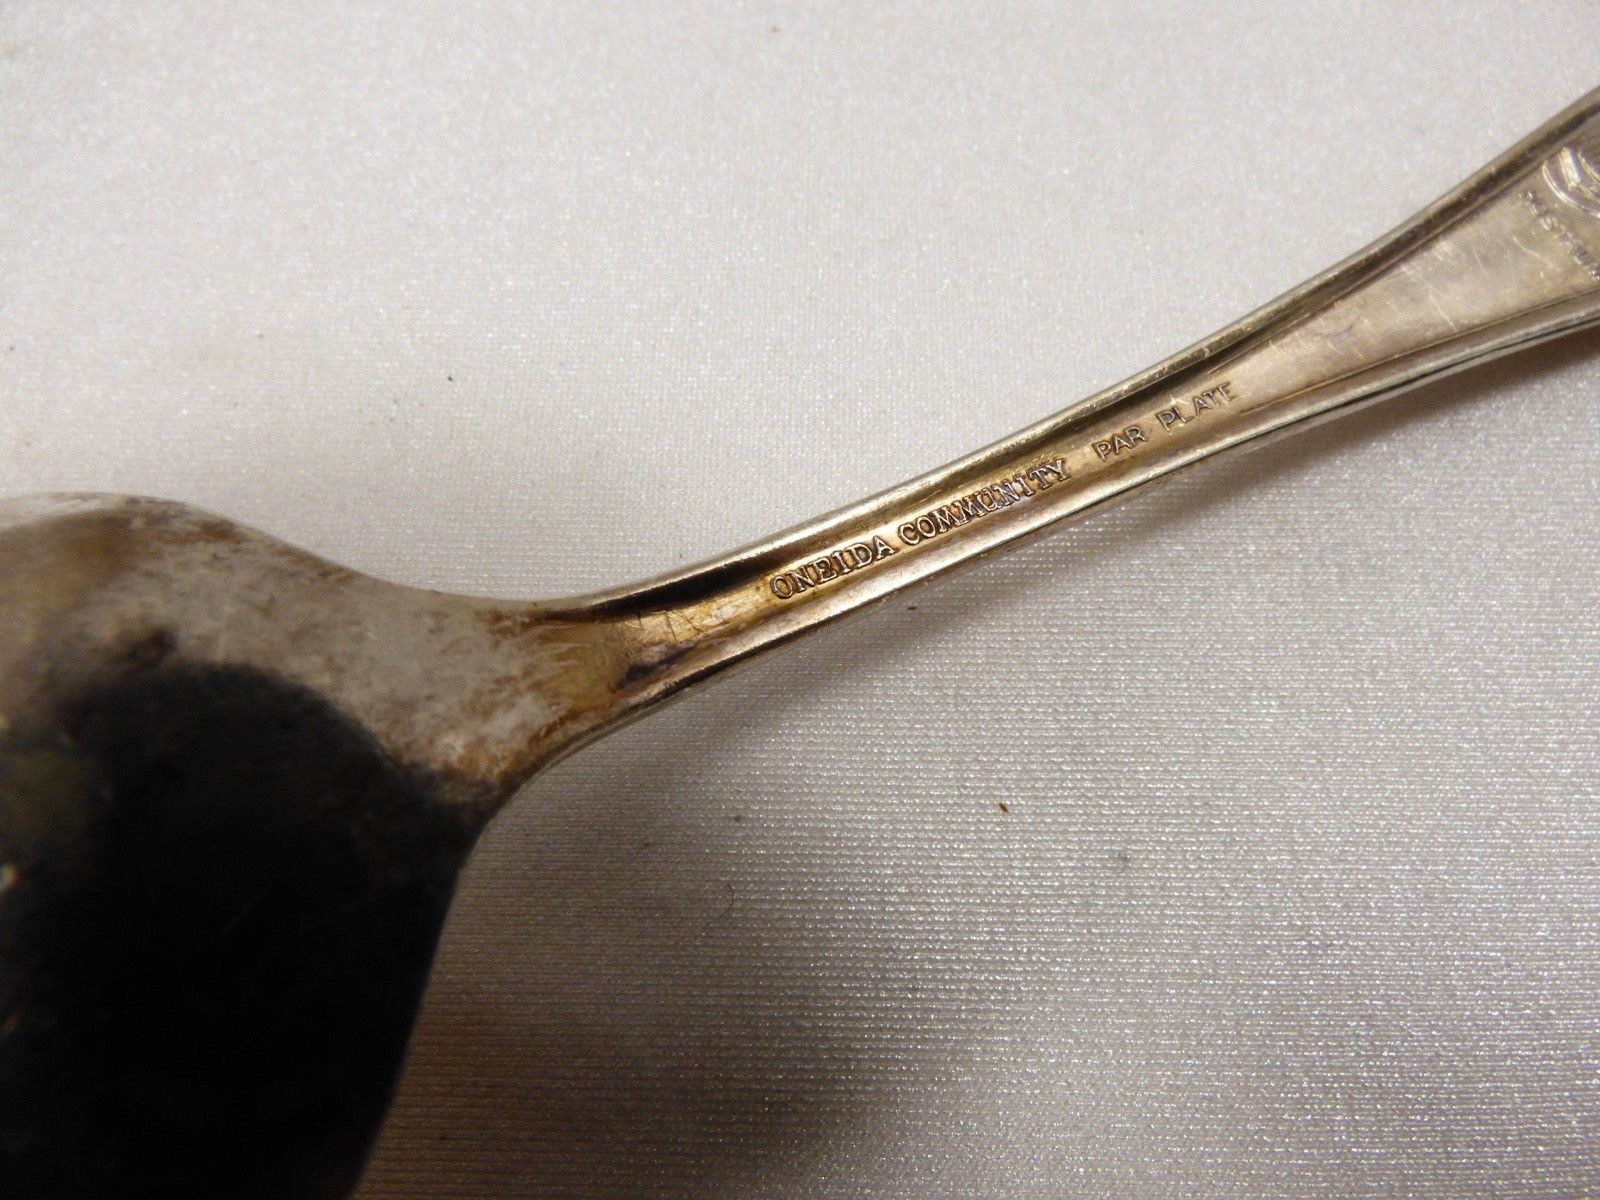 Details about   5   Oneida Community Silver  TWILIGHT  Silverplate Teaspoons  1956  FREE SHIP 